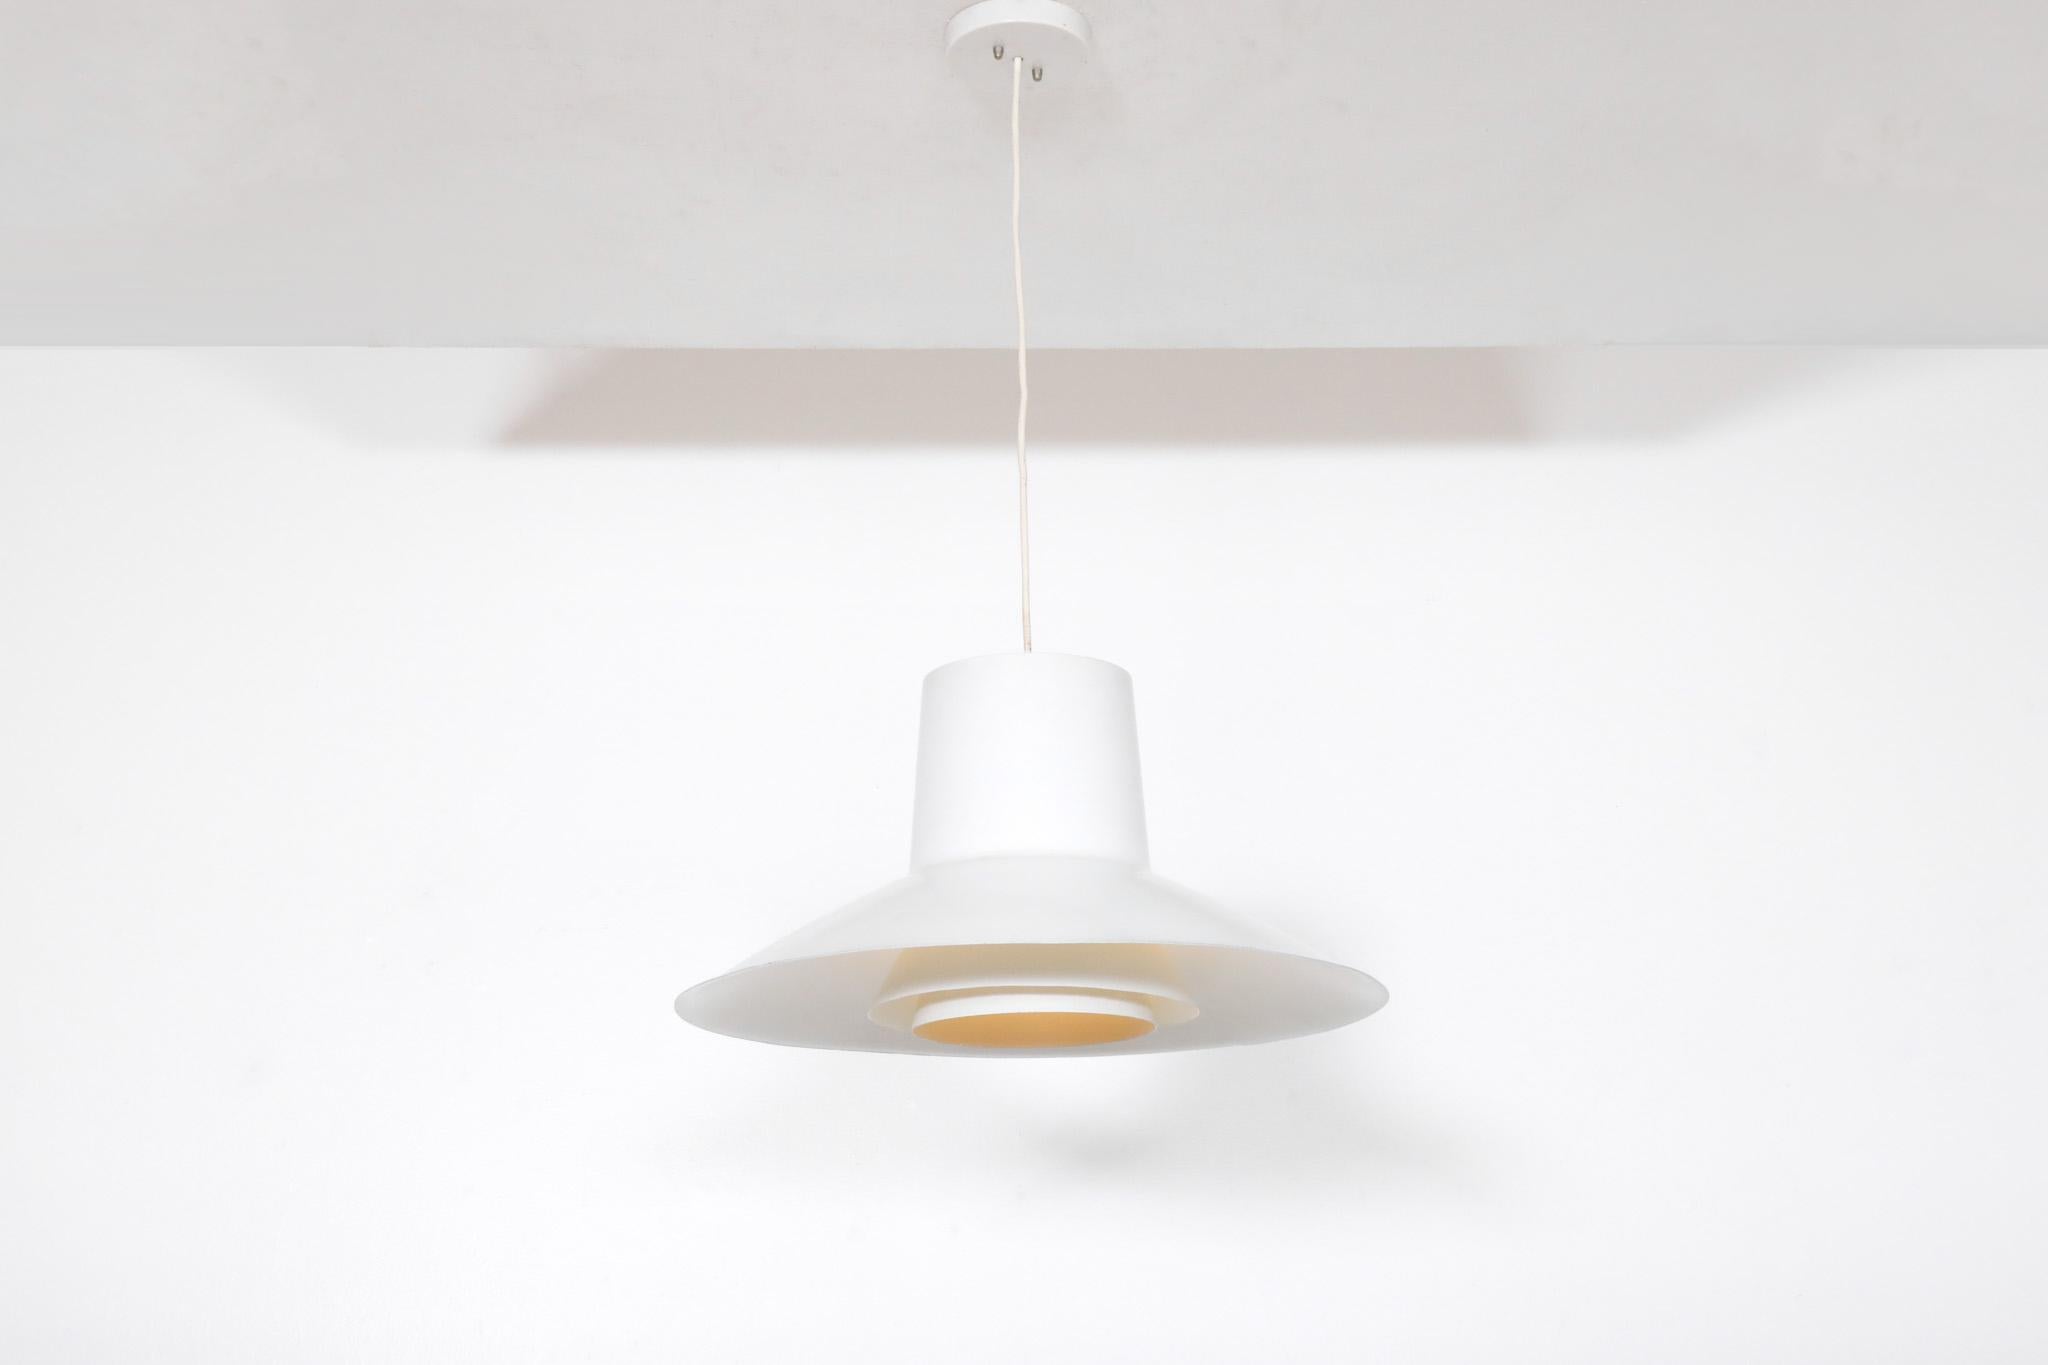 Mid-Century 'Auditorie 2' pendant by Svend Middelbo for Nordisk Solar, 1970s. This mid size configuration is apart of the classic 'Auditorie series' trio. White enameled metal frame with 2 layered shades and matching ceiling mount hardware. In